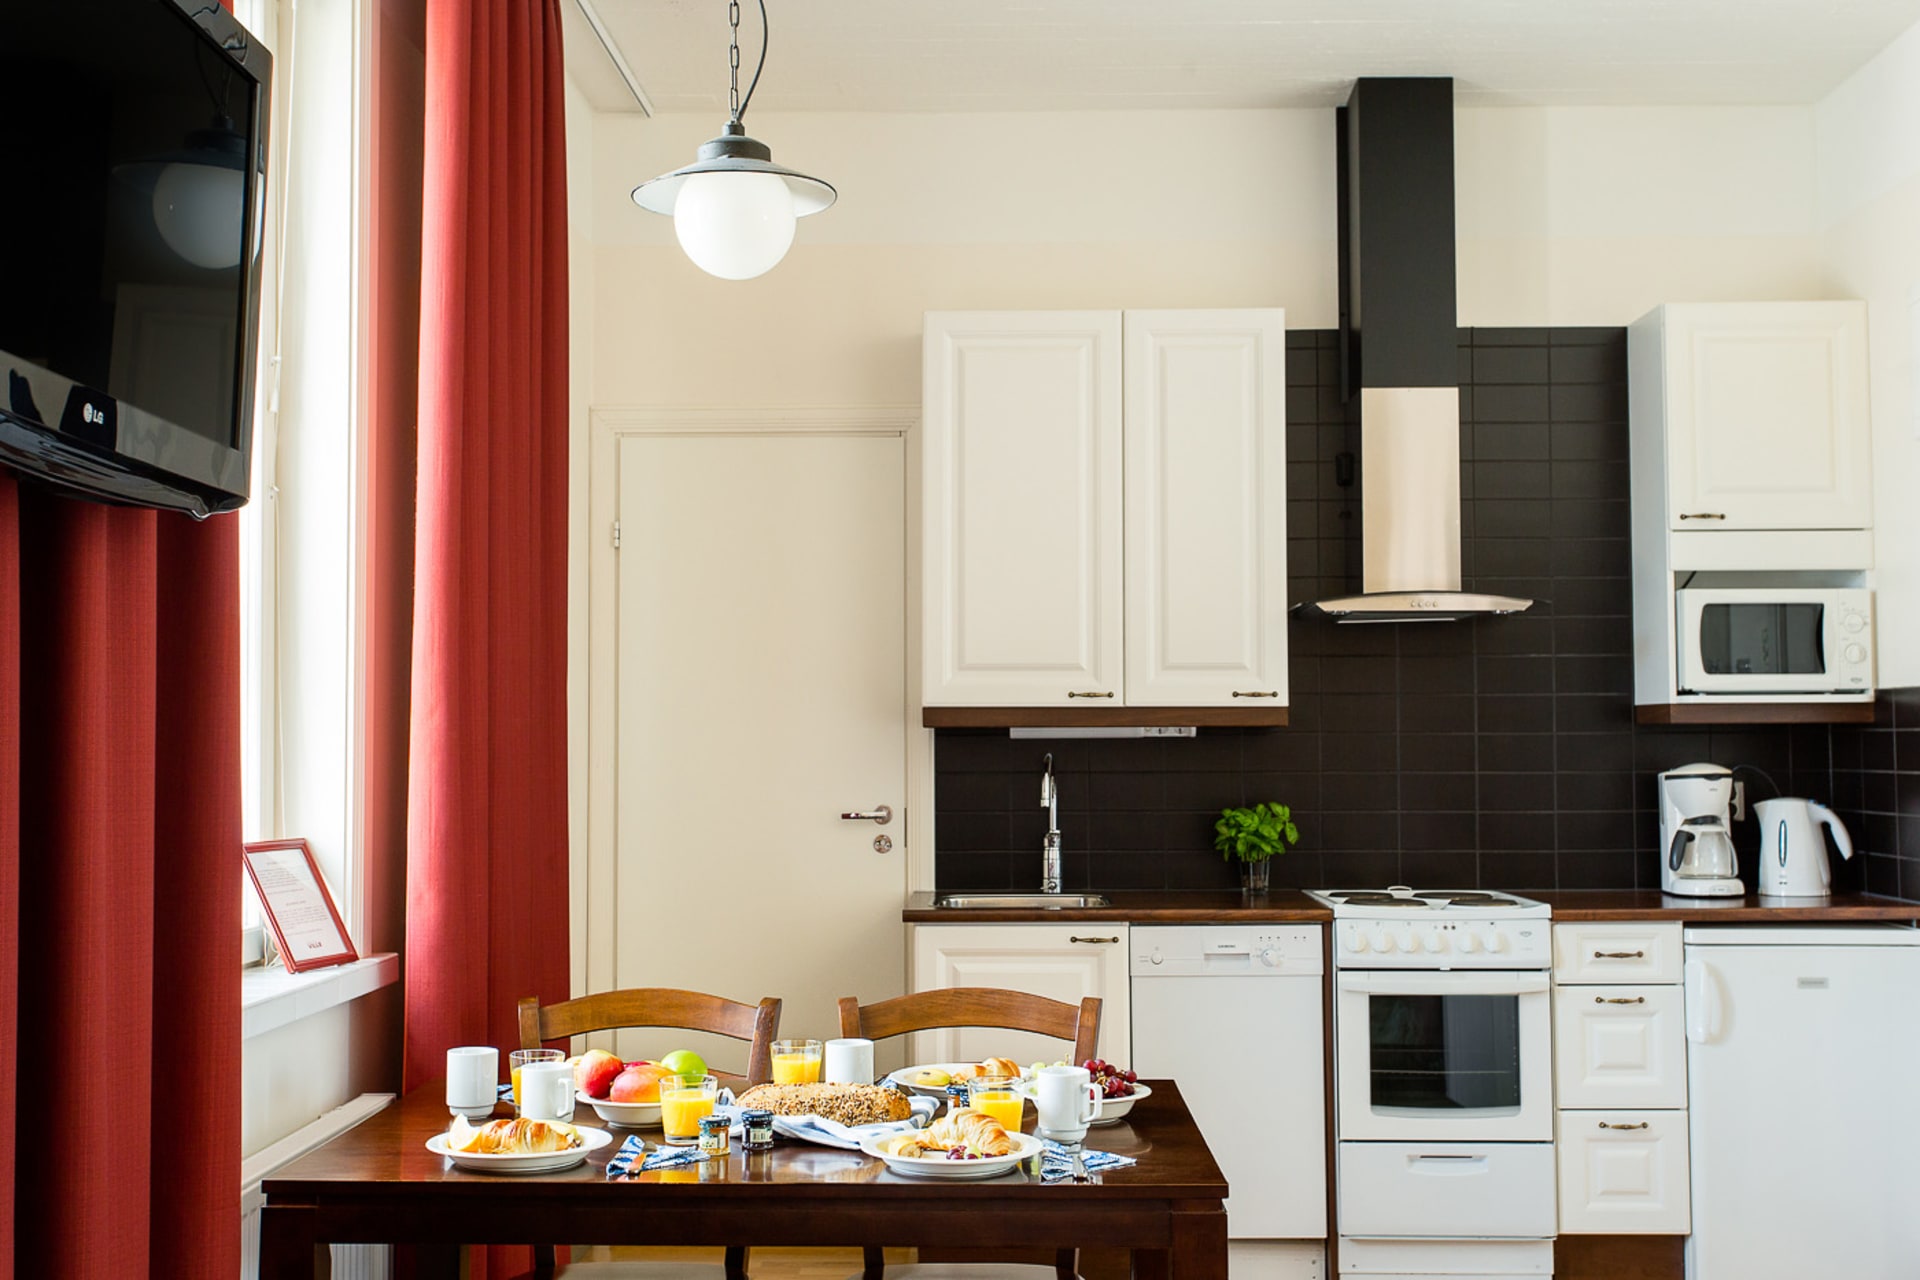 Room for two persons with kitchenette